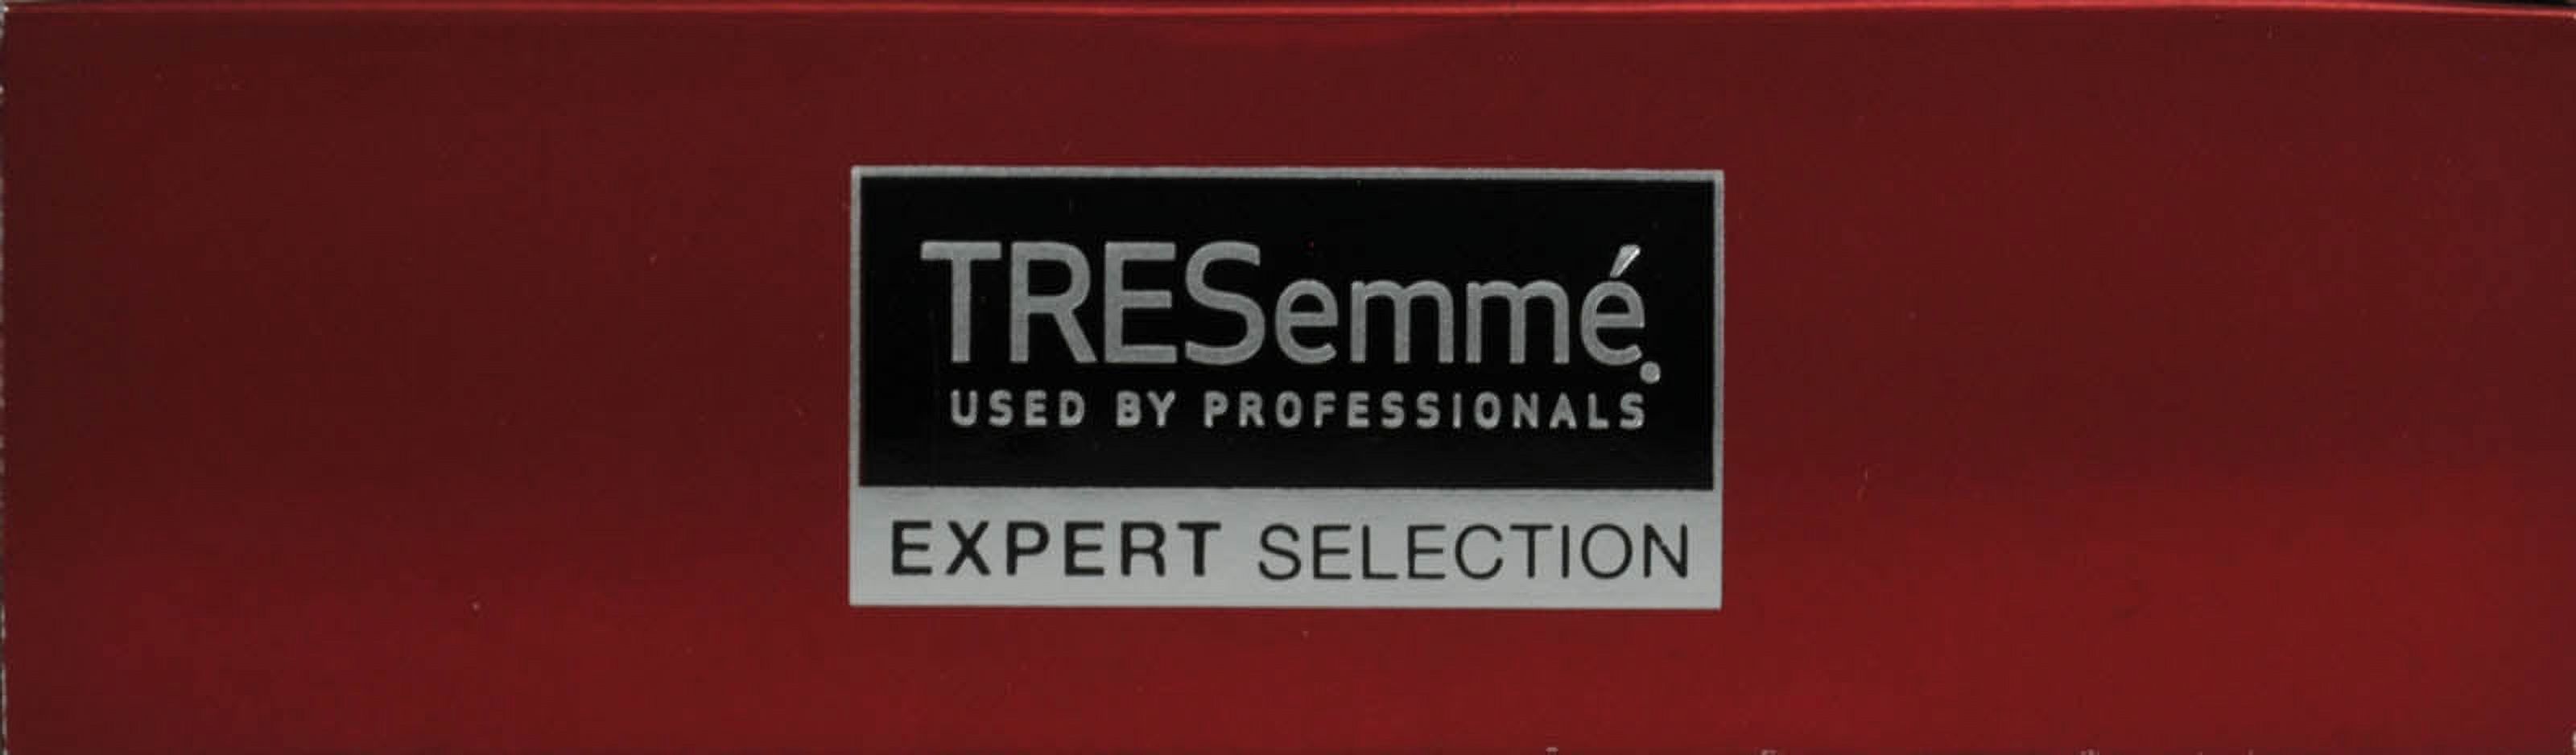 Tresemme Expert Selection Keratin Smooth 7 Day Smooth Control Starter Set - image 4 of 4